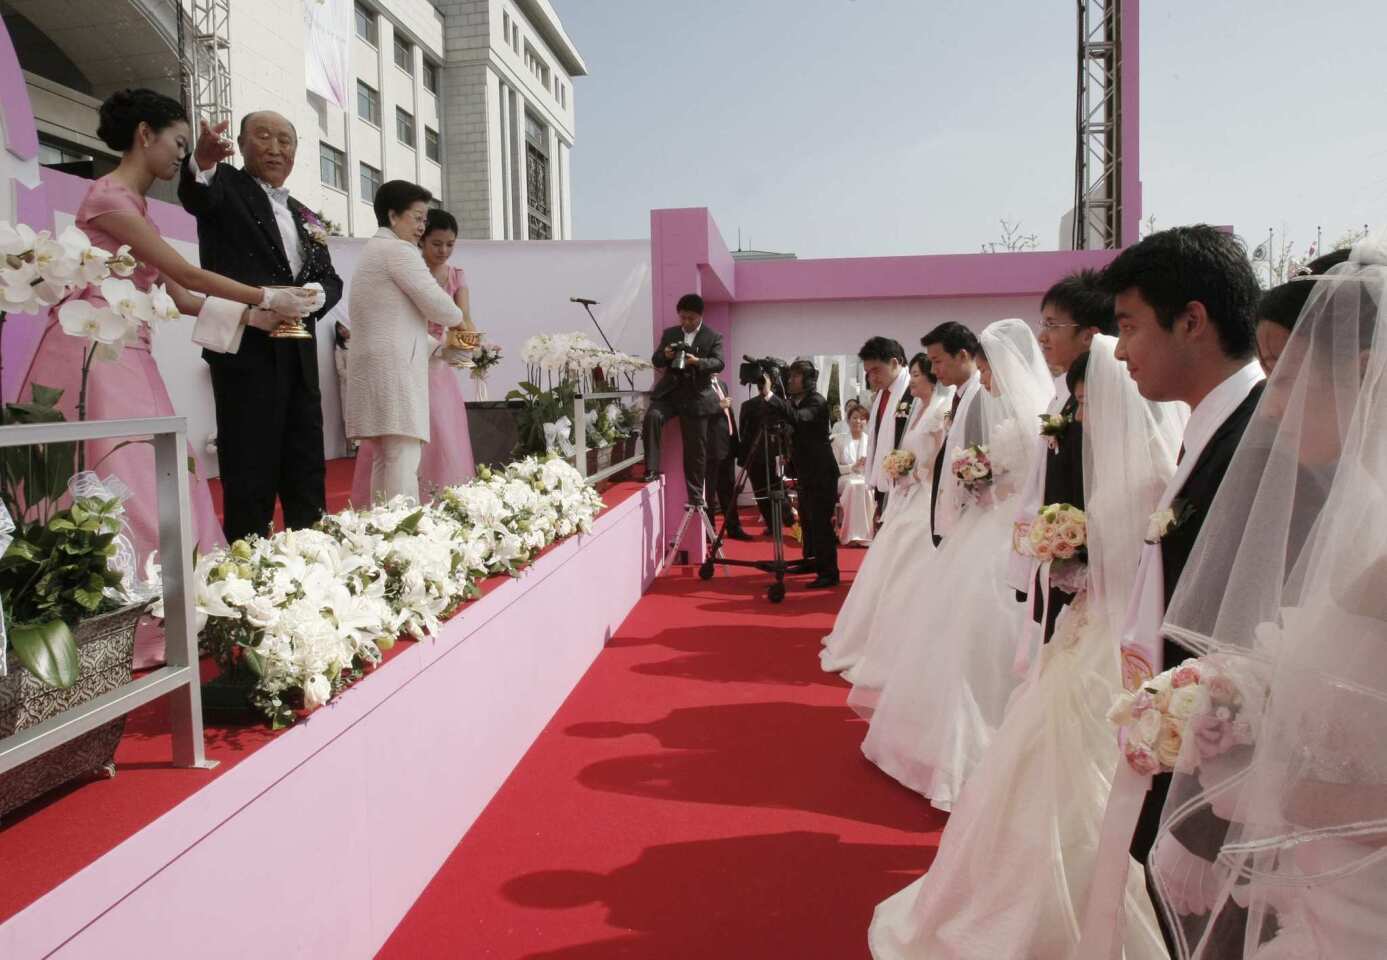 The Rev. Sun Myung Moon, top second left, sprinkles holy water during a mass wedding ceremony in Asan, South Korea, as about 7,200 South Korean and foreign couples exchange or reaffirm marriage vows.